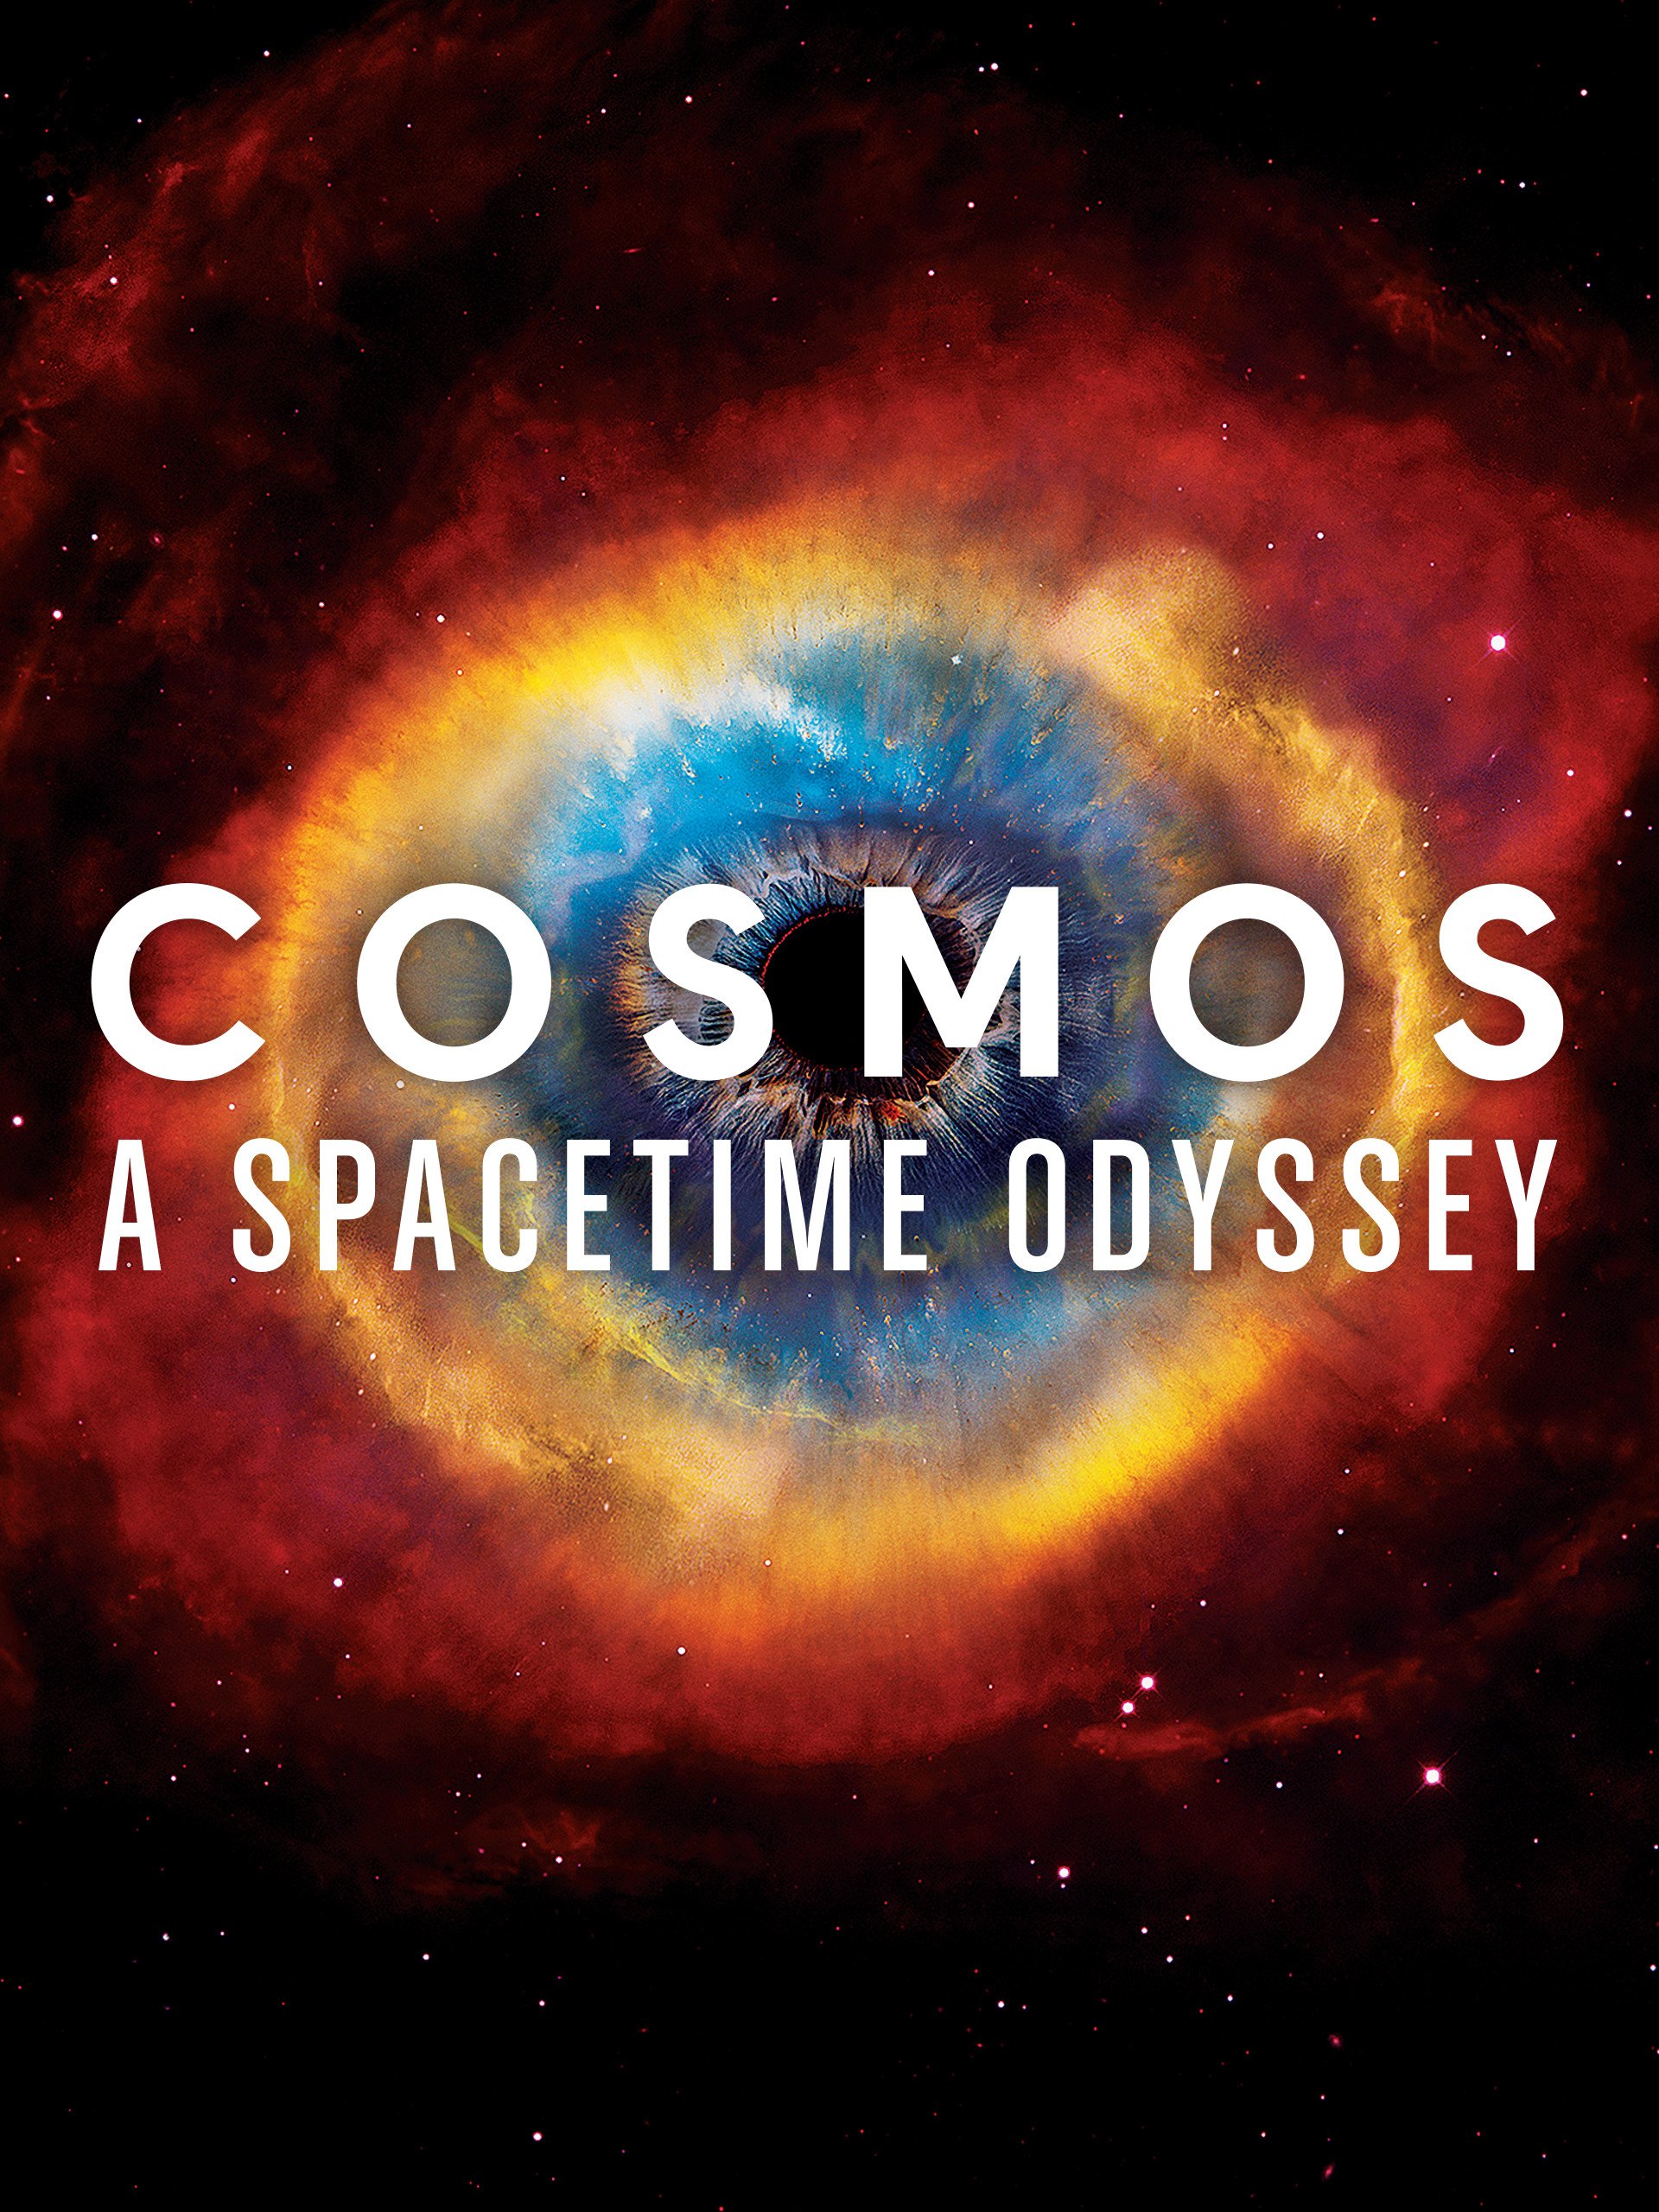 Cosmos a spacetime odyssey episode 5 worksheet answers